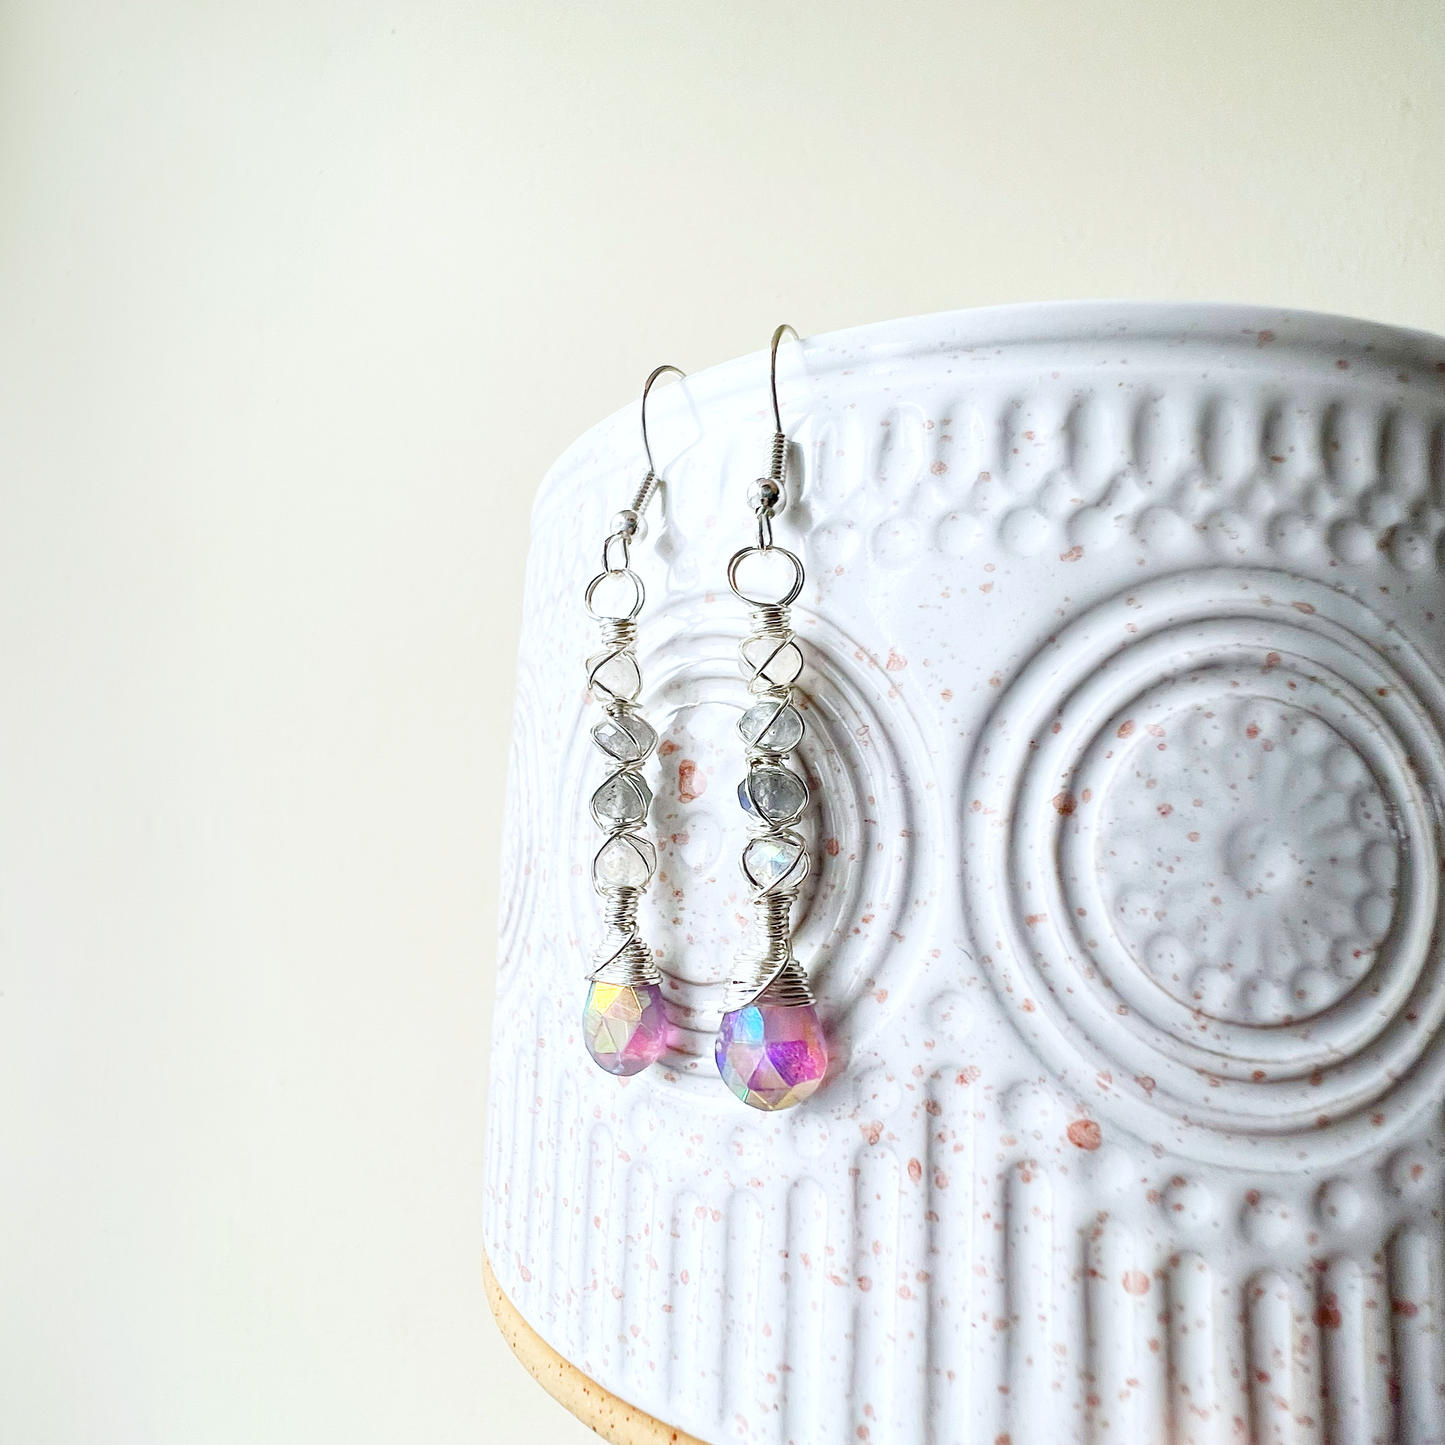 Twisted kisses earrings - Labradorite and mystic amethyst